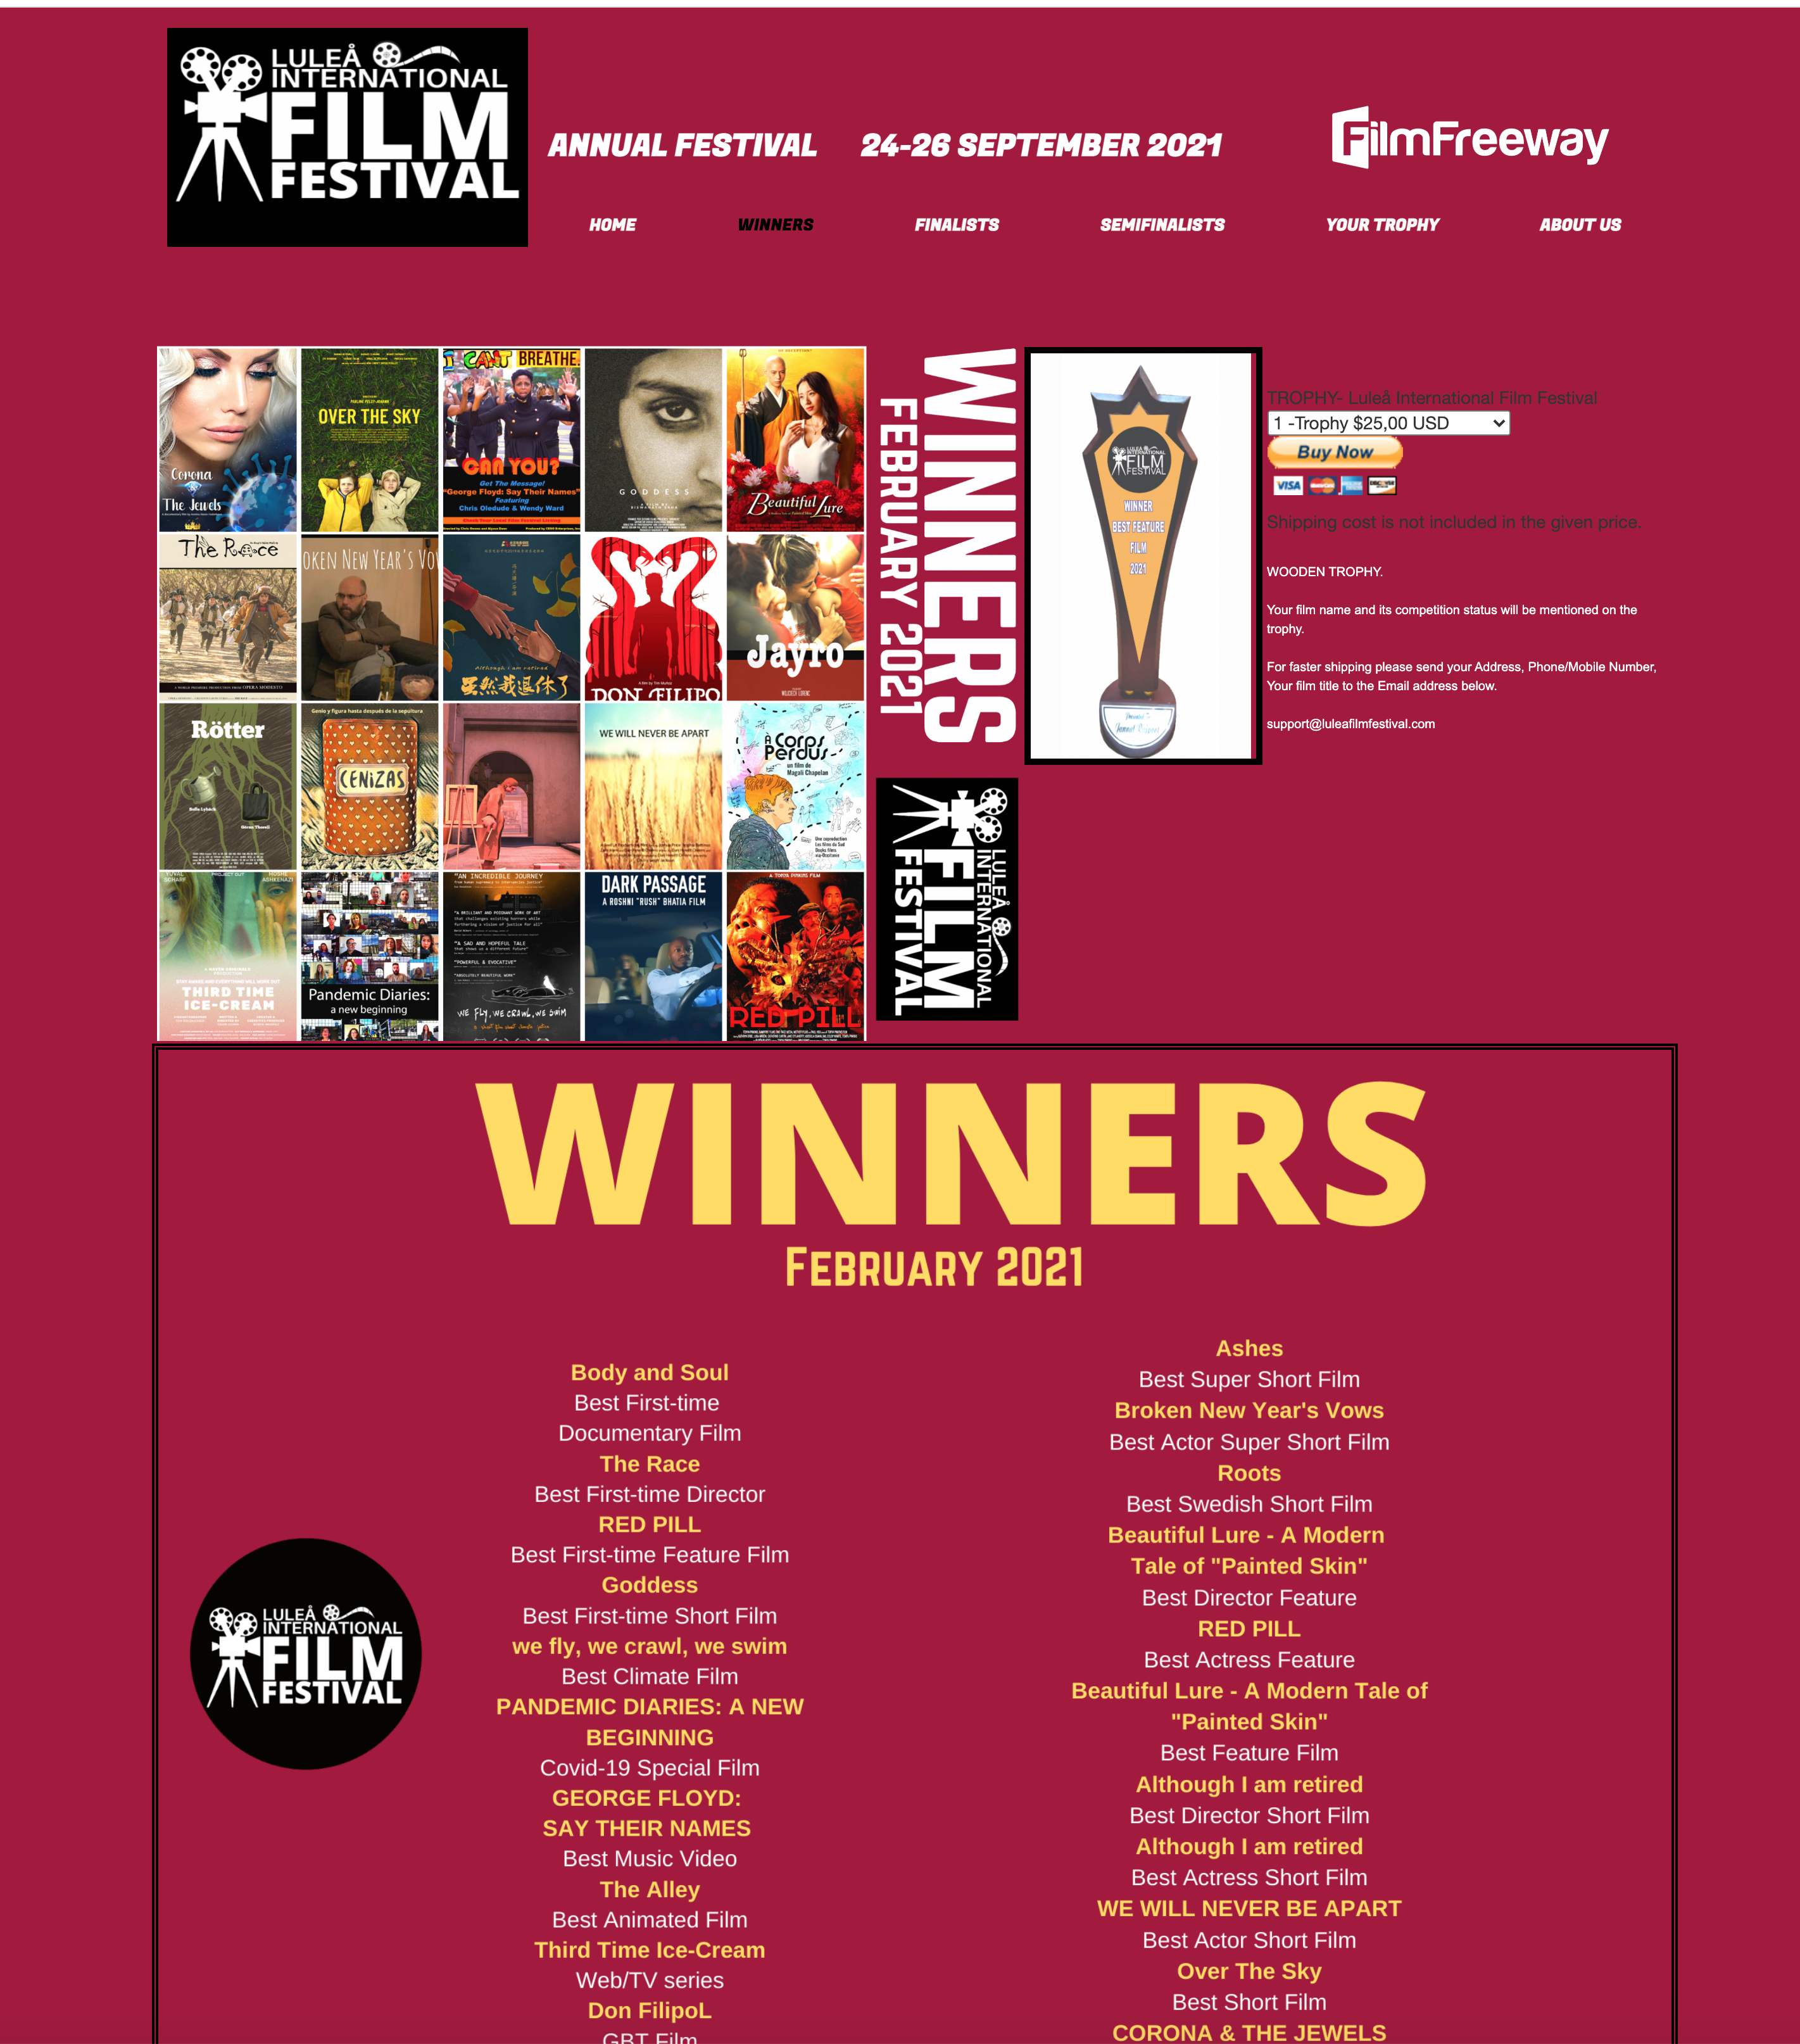 Screenshot of the Lulea Festival website's page showing the winners, including the film The Alley